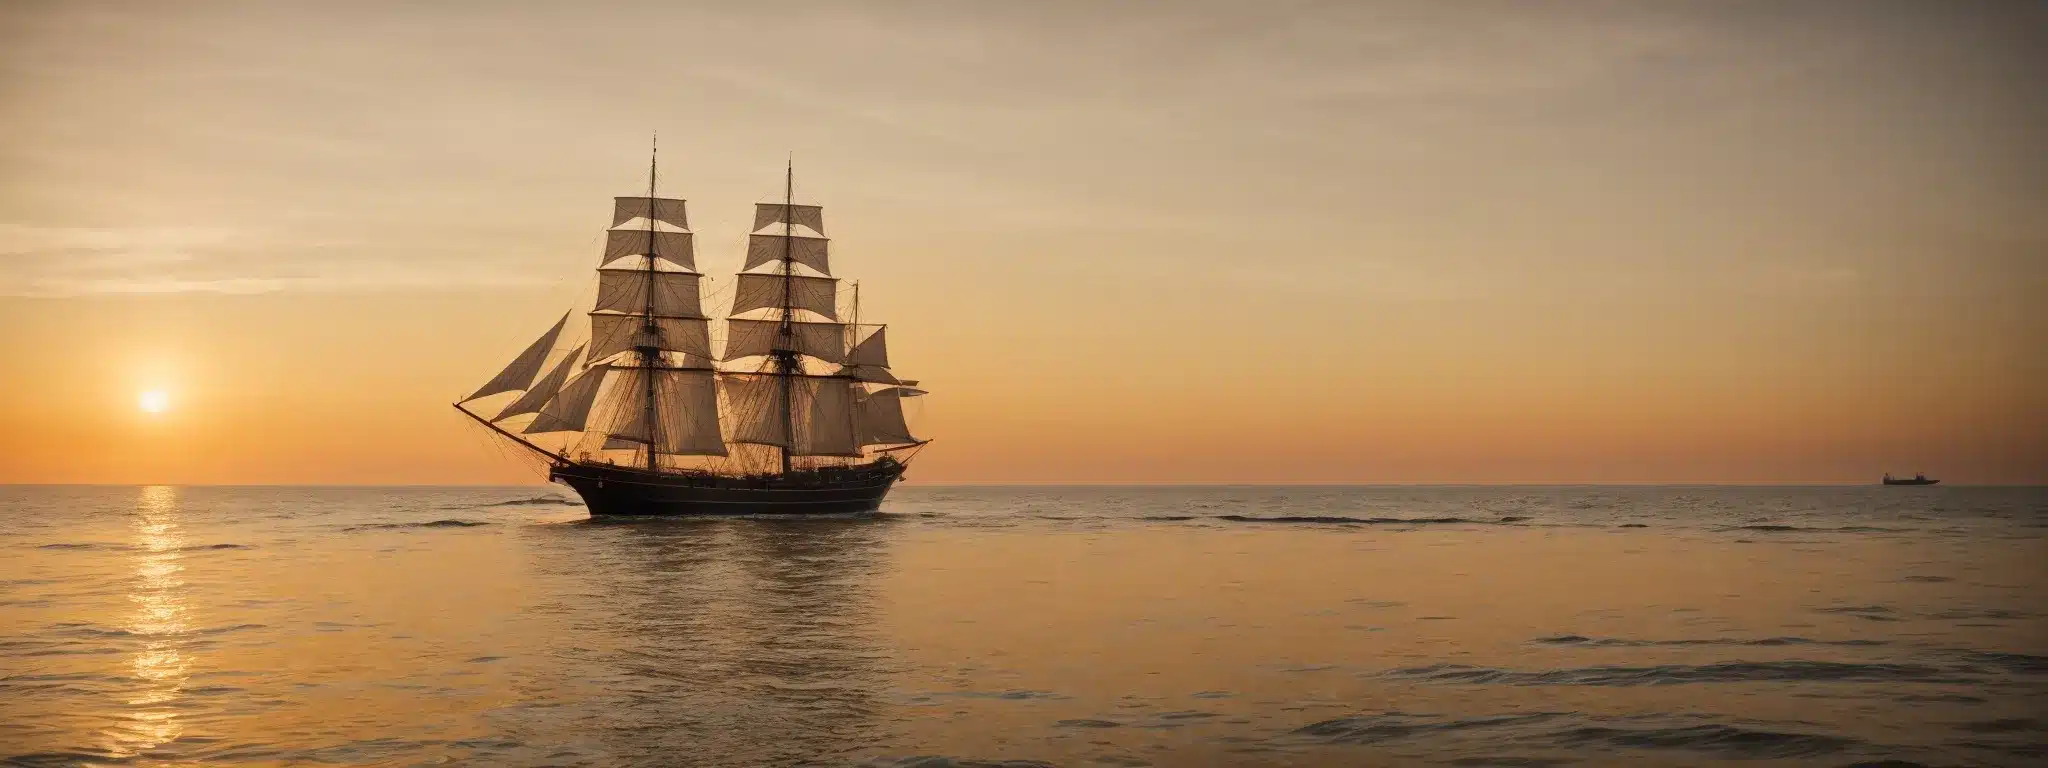 A Majestic Sailing Ship Glides Towards A Golden Sunset On A Calm Sea.